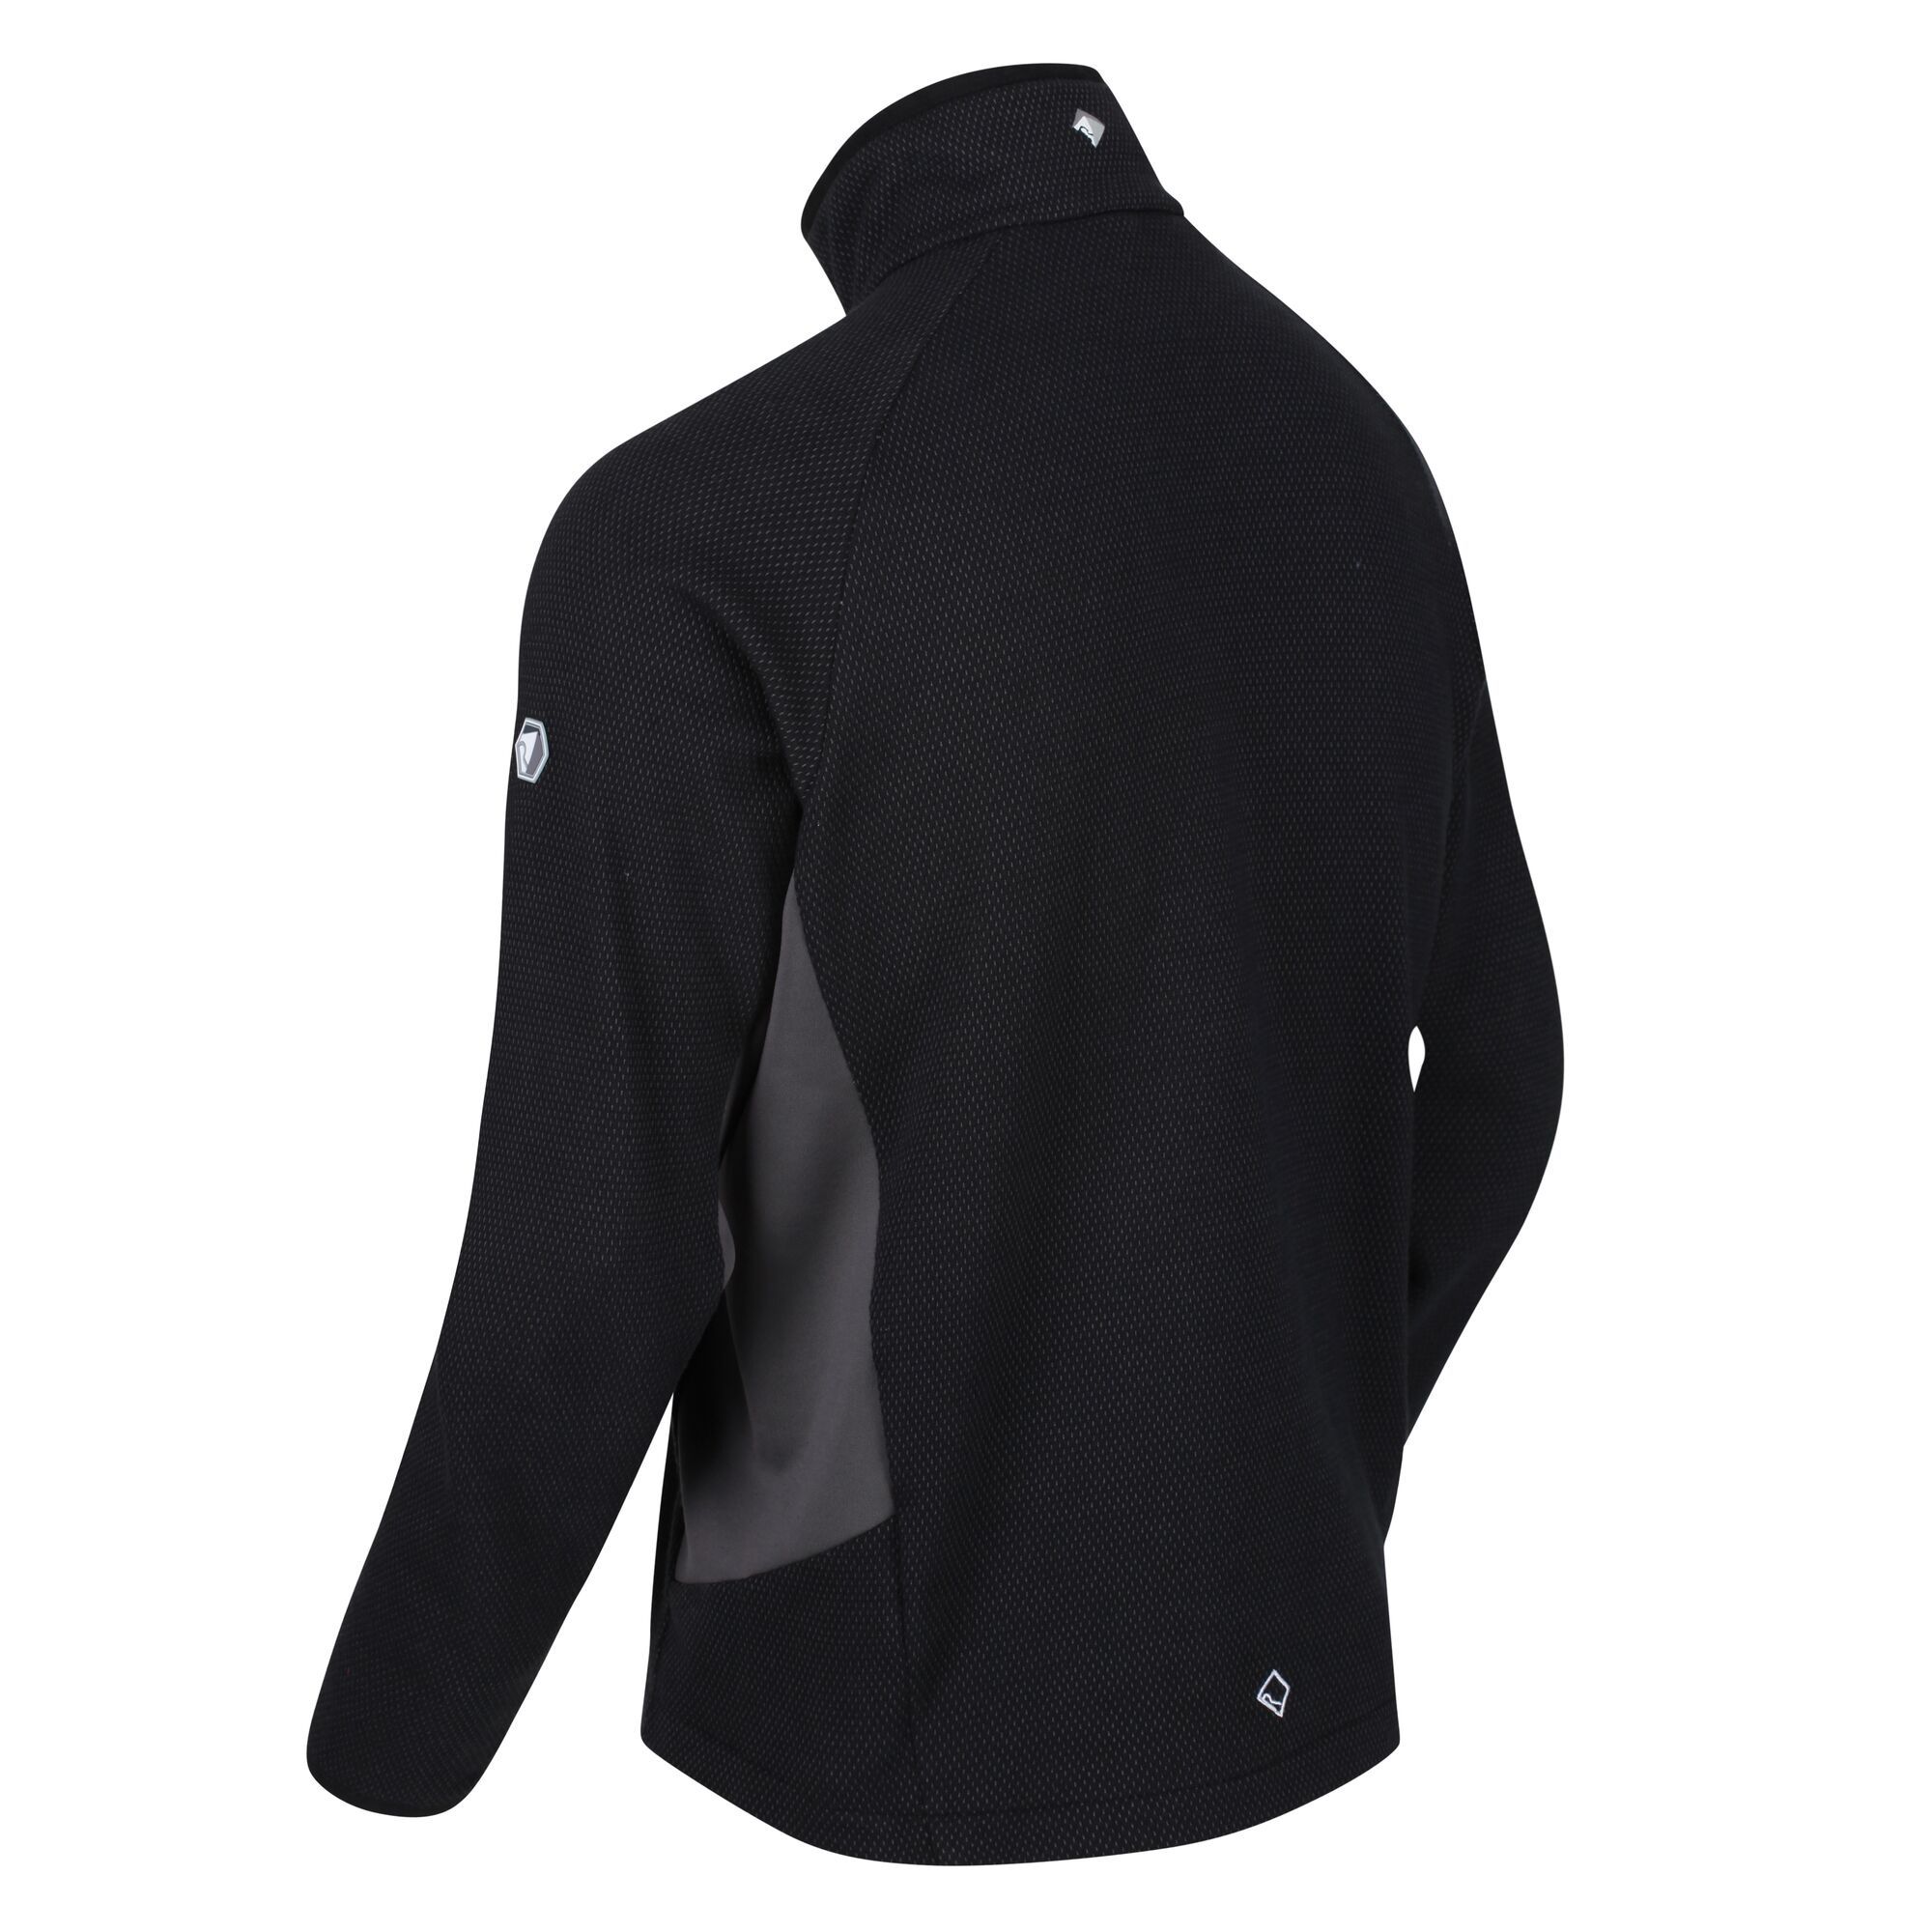 Material: 74% cotton & 26% polyester two tone fleece. Extol stretch side panels. Zip neck. Stretch binding to neck and cuffs.